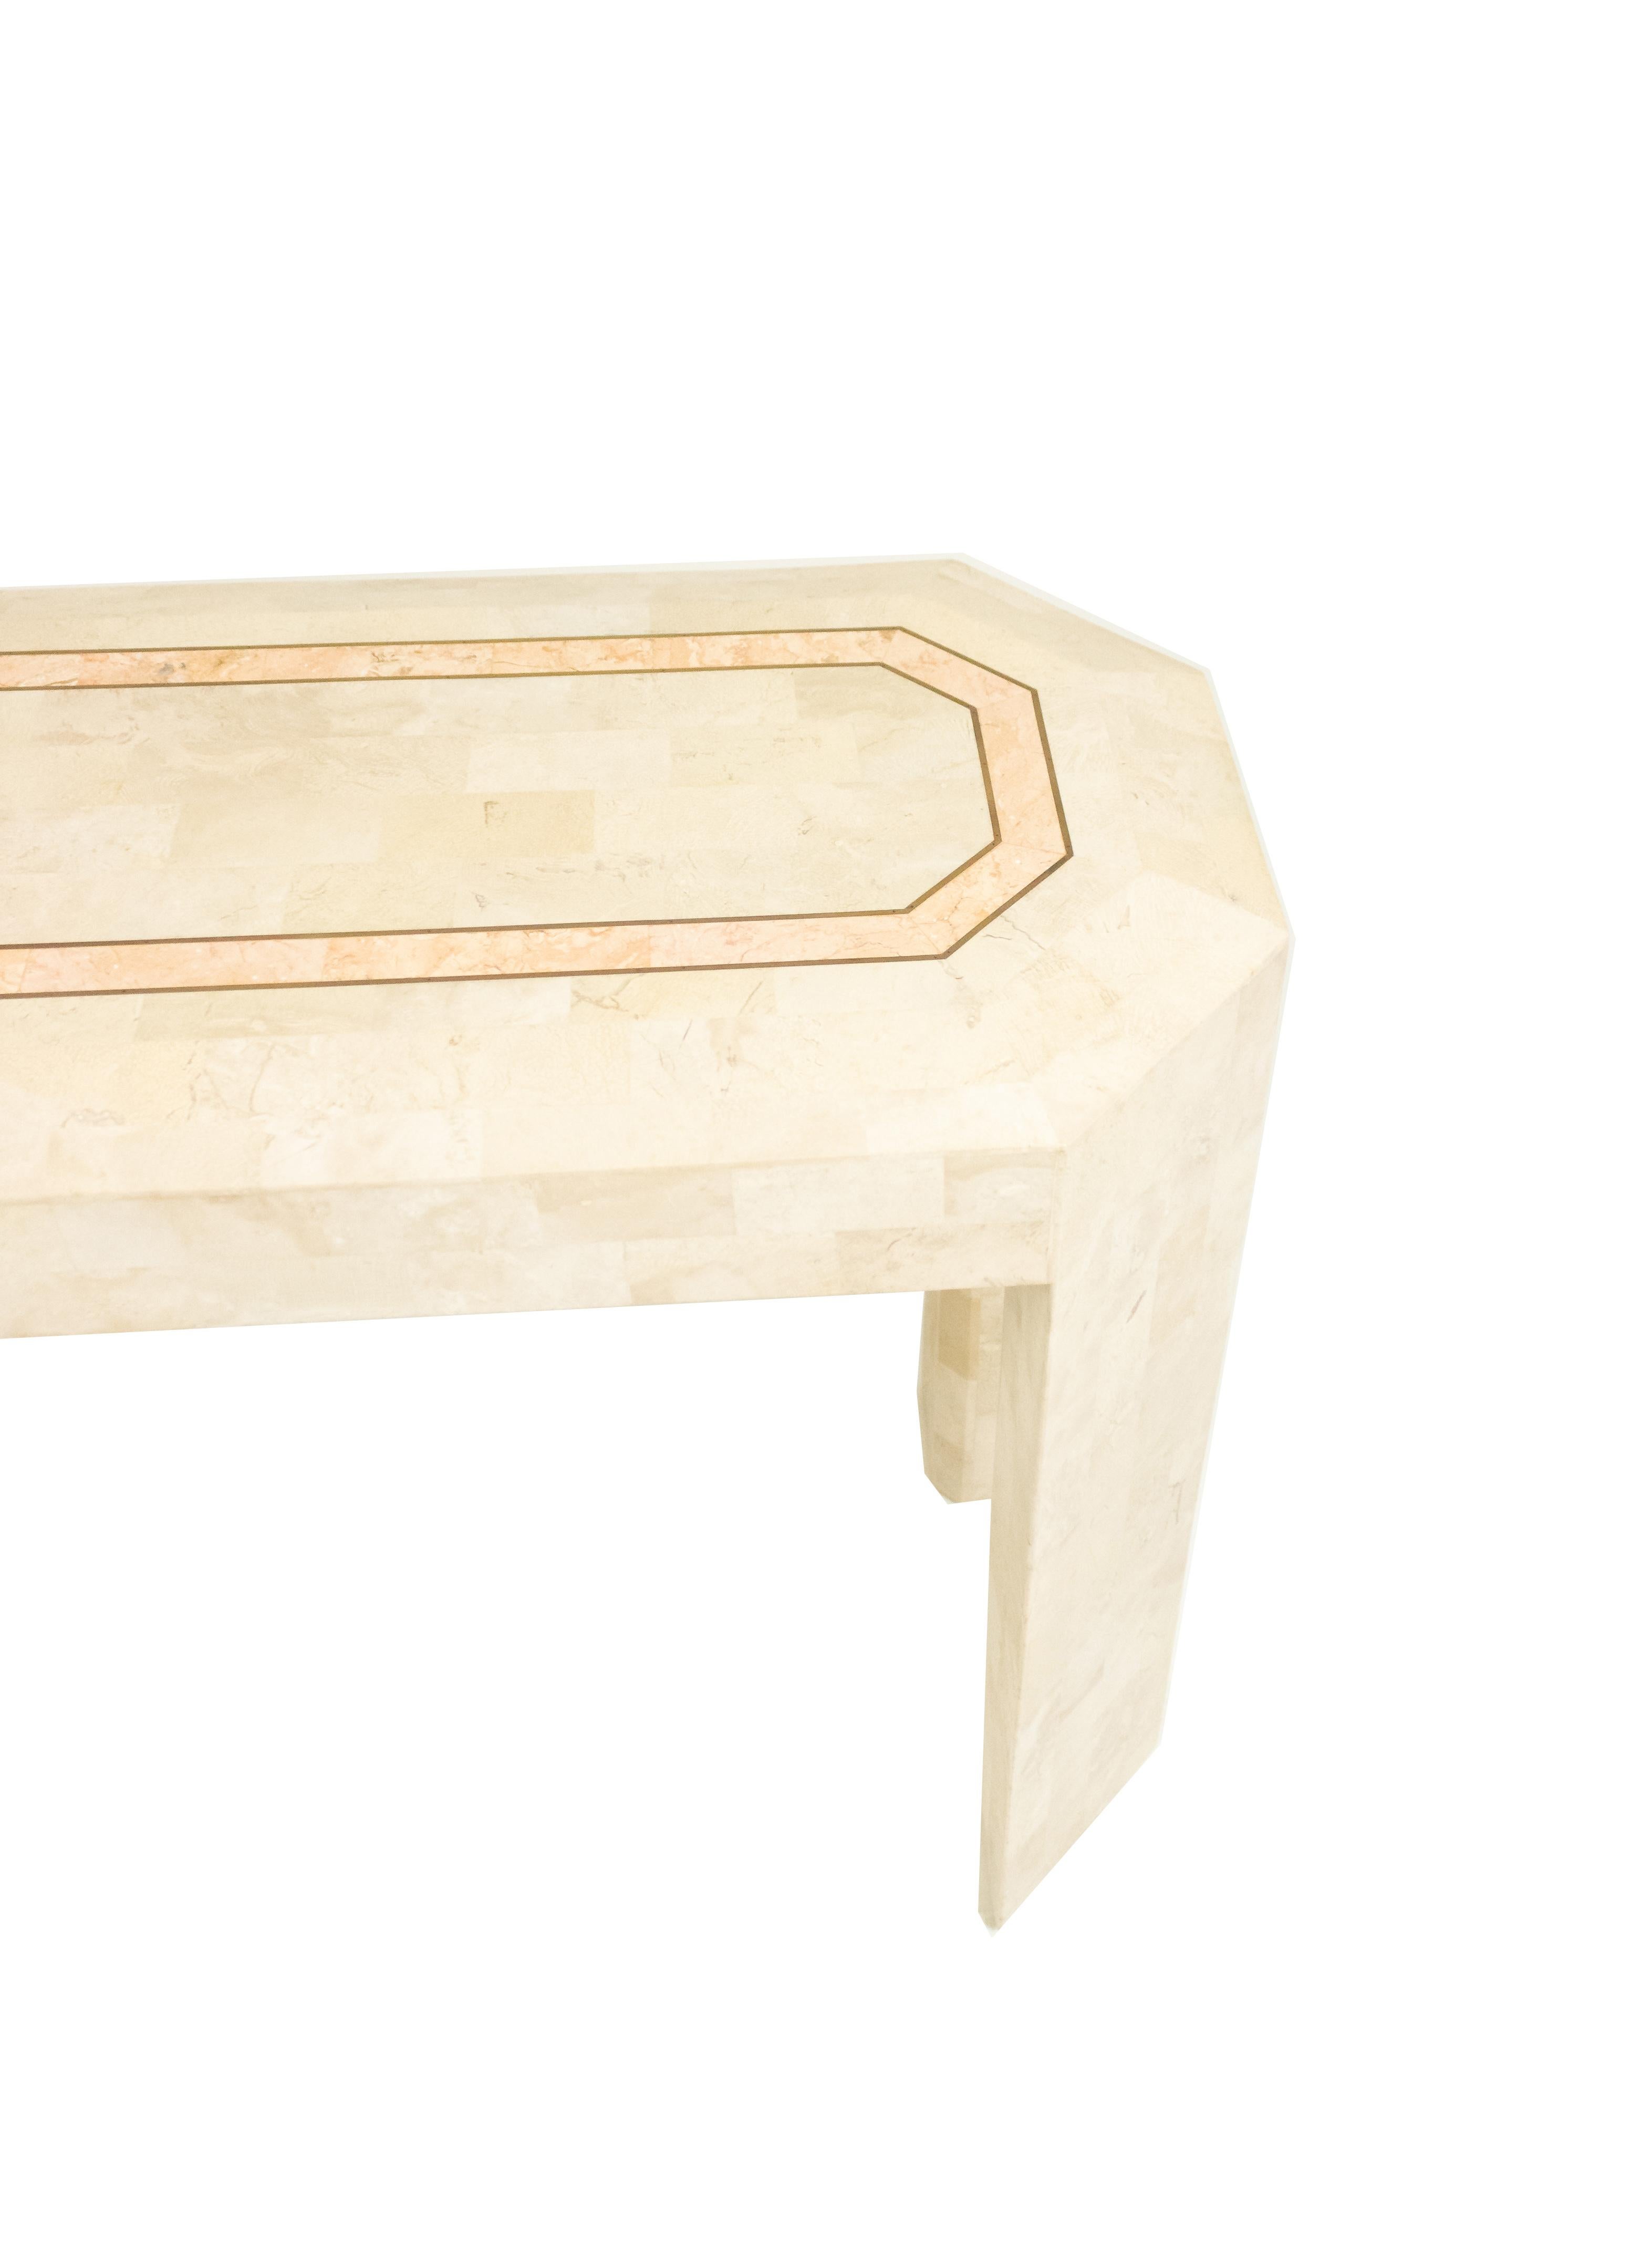 Beige Tessellated Hardstone Console Table For Sale 2